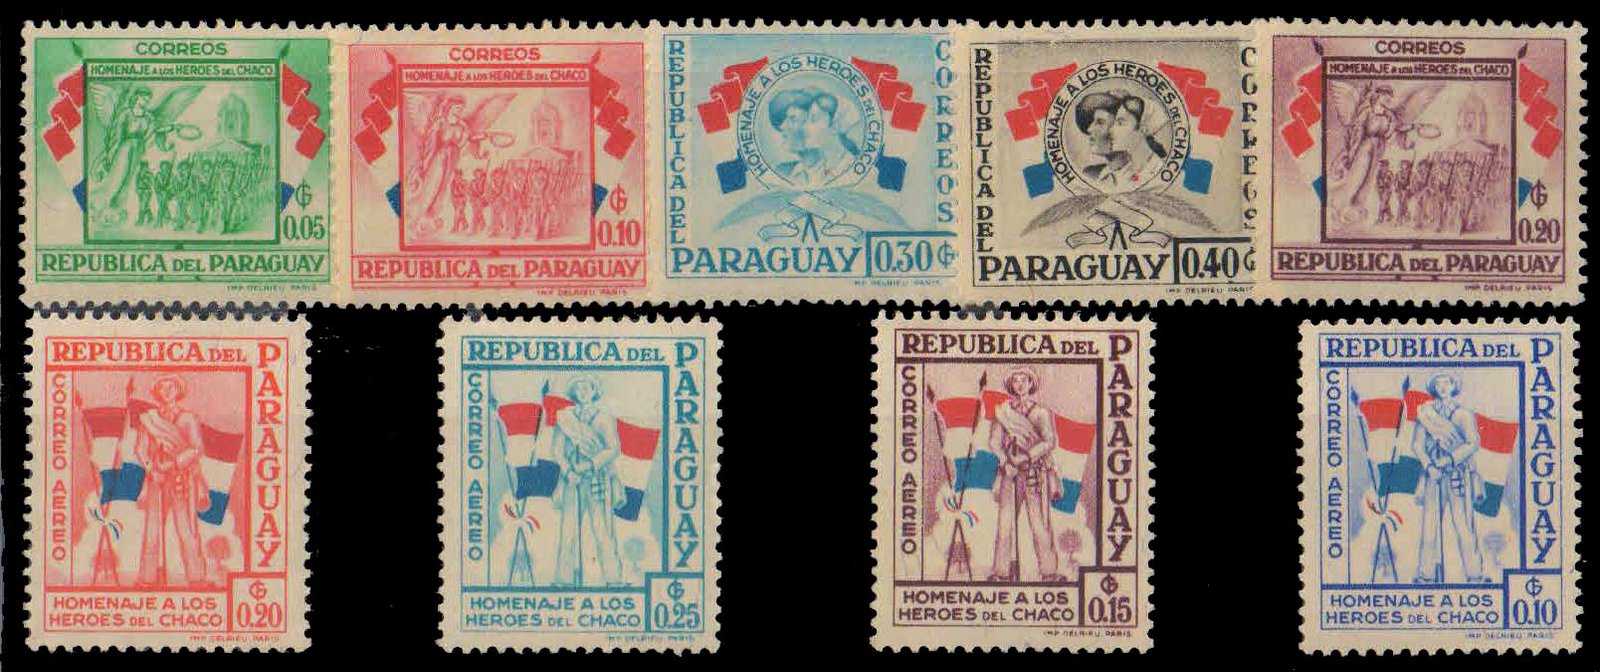 PARAGUAY 1957-Chaco Heroes, Soldiers & Flags, 9 Different Mint Stamps